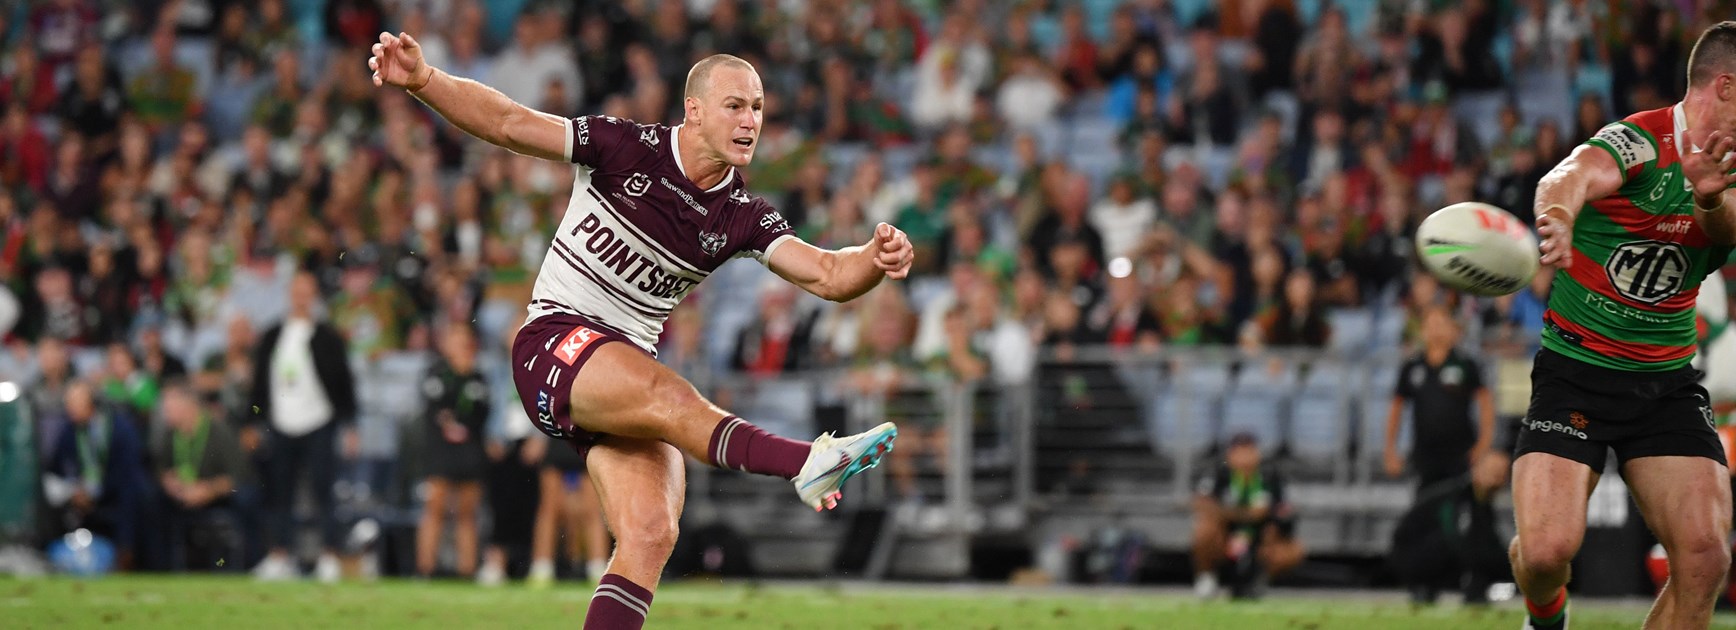 Two Manly players pick up Dally M points in Souths loss